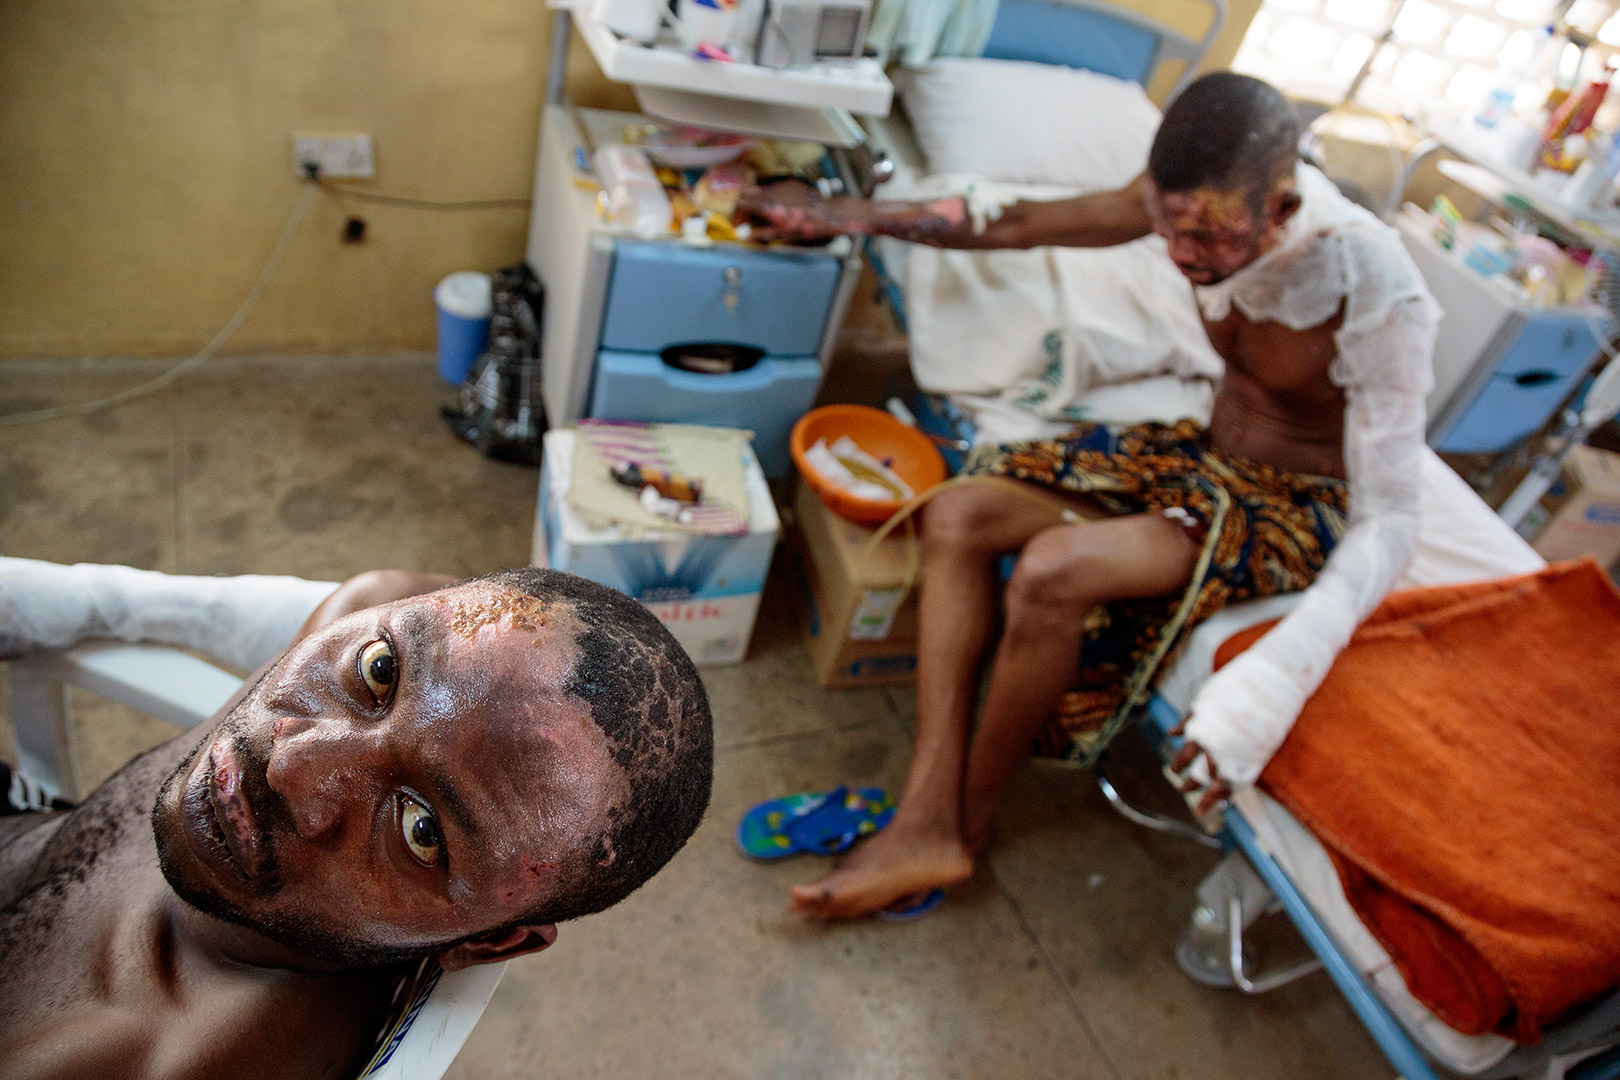 At the National Orthopedic Hospital, Christian survivors of a Boko Haram bomb attack on a bus depot on March 18, 2013 get free care, in Kano, Nigeria on March 29, 2013. Over 100 people died and scores were injured. | Ed Kashi 